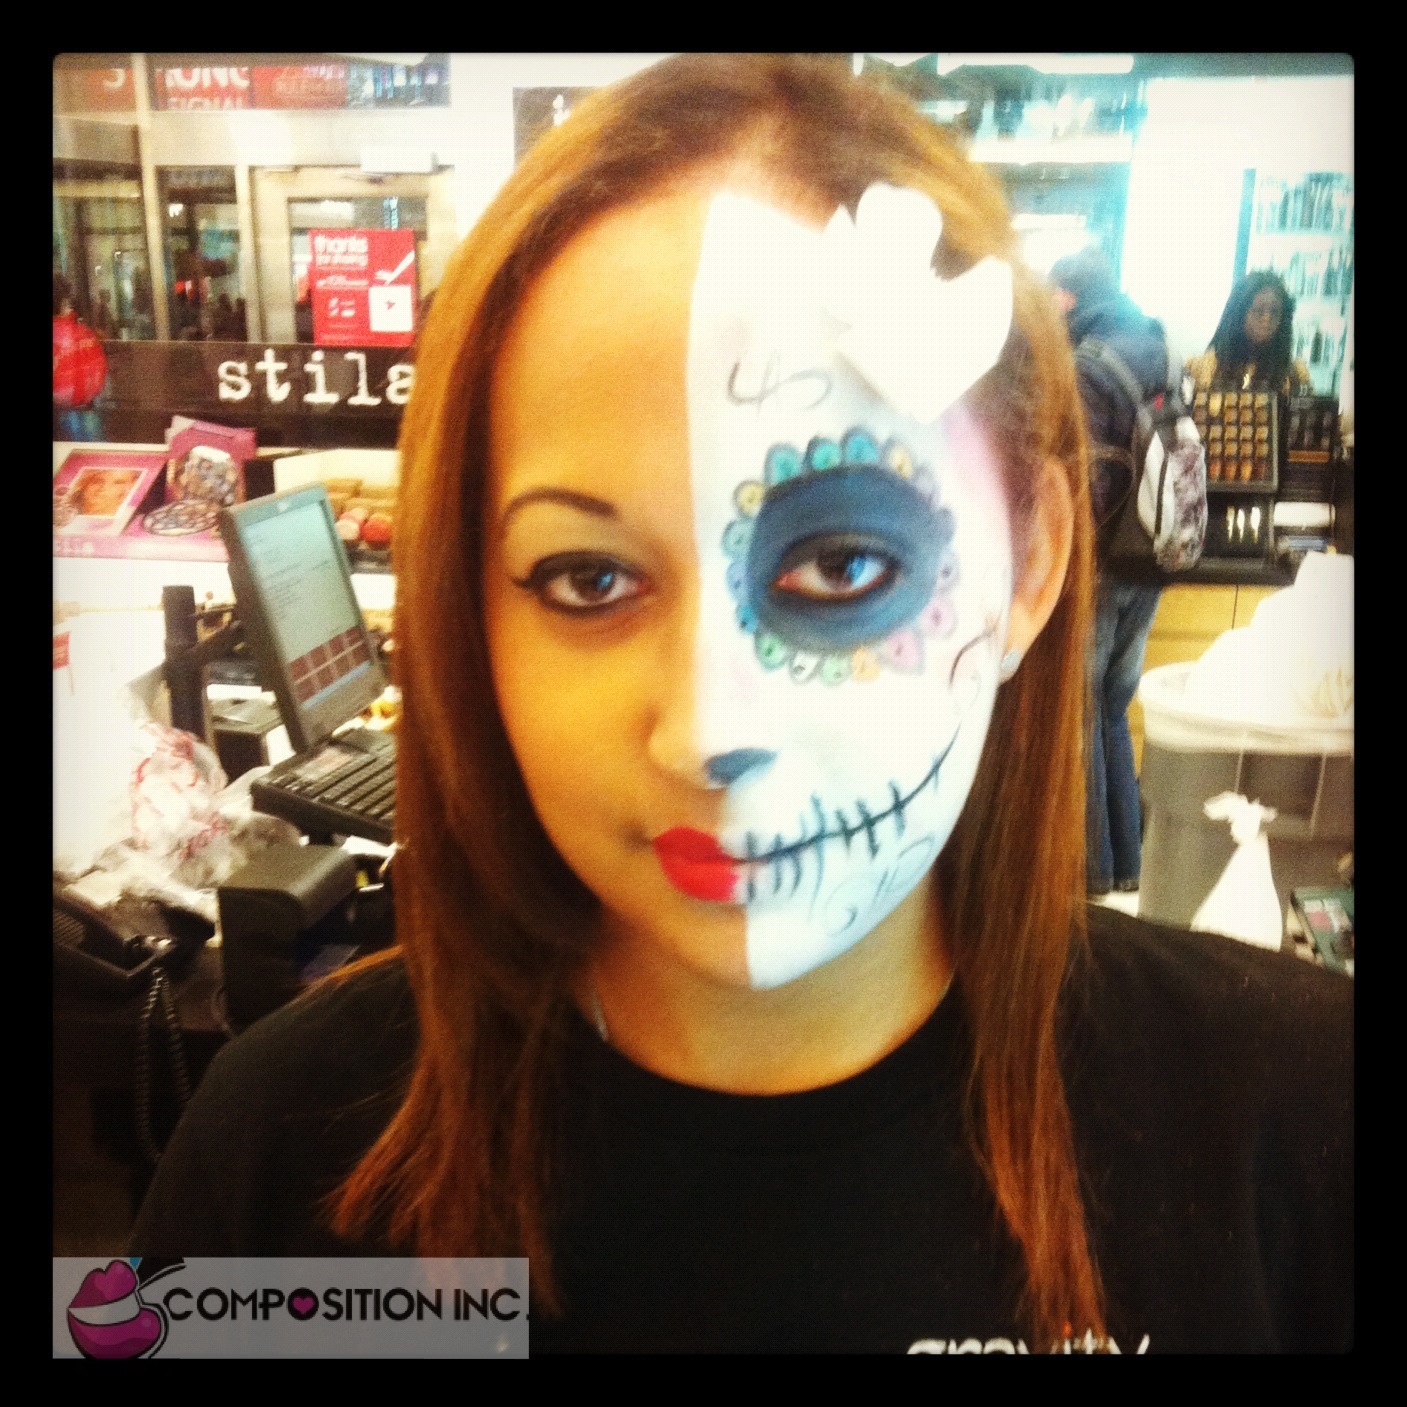 How To Do Candy Skull Makeup